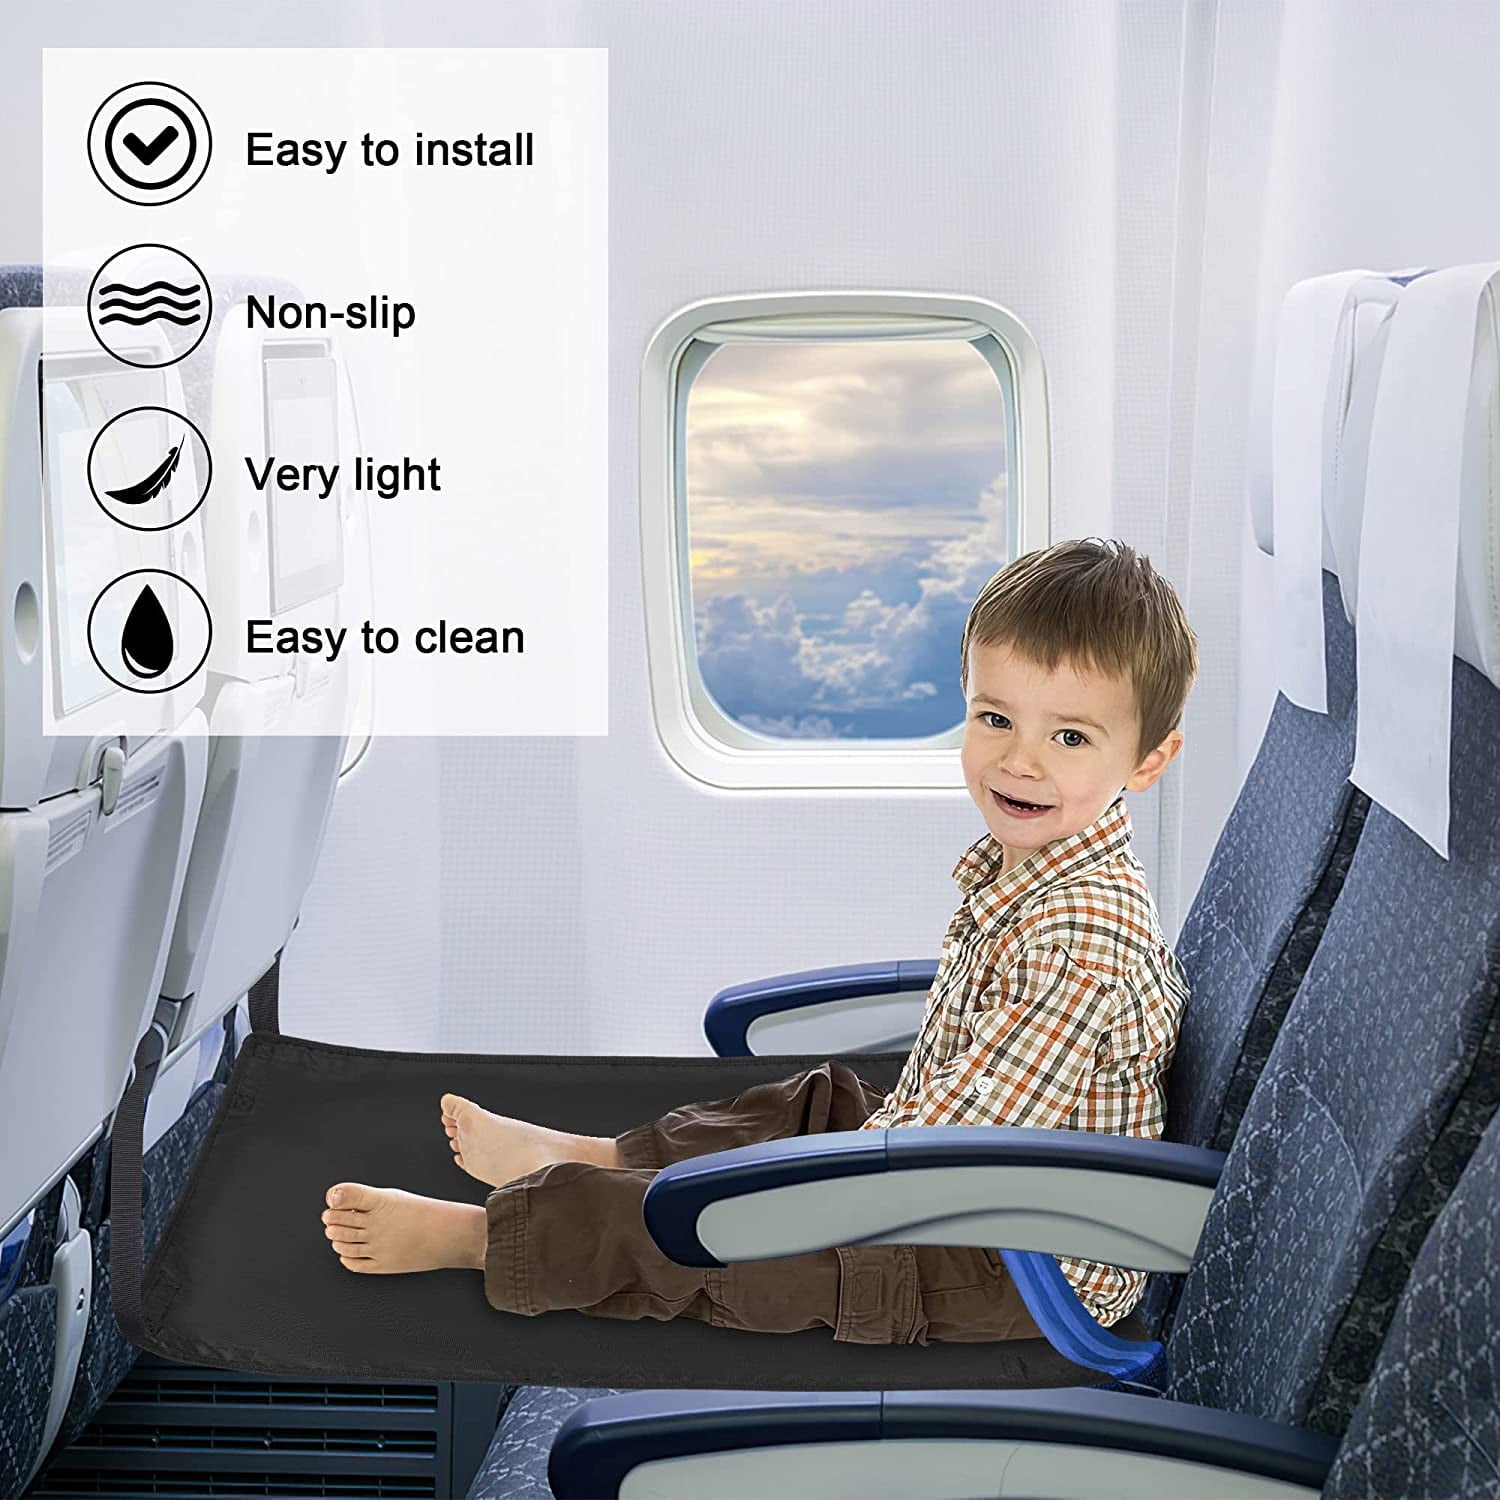 Airplane Footrest for Kids,Travel Airplane Toddler Bed,Portable Toddler Bed  for Travel,Travel Foot Rest for Airplane Flights,Travel Seat Cushion for